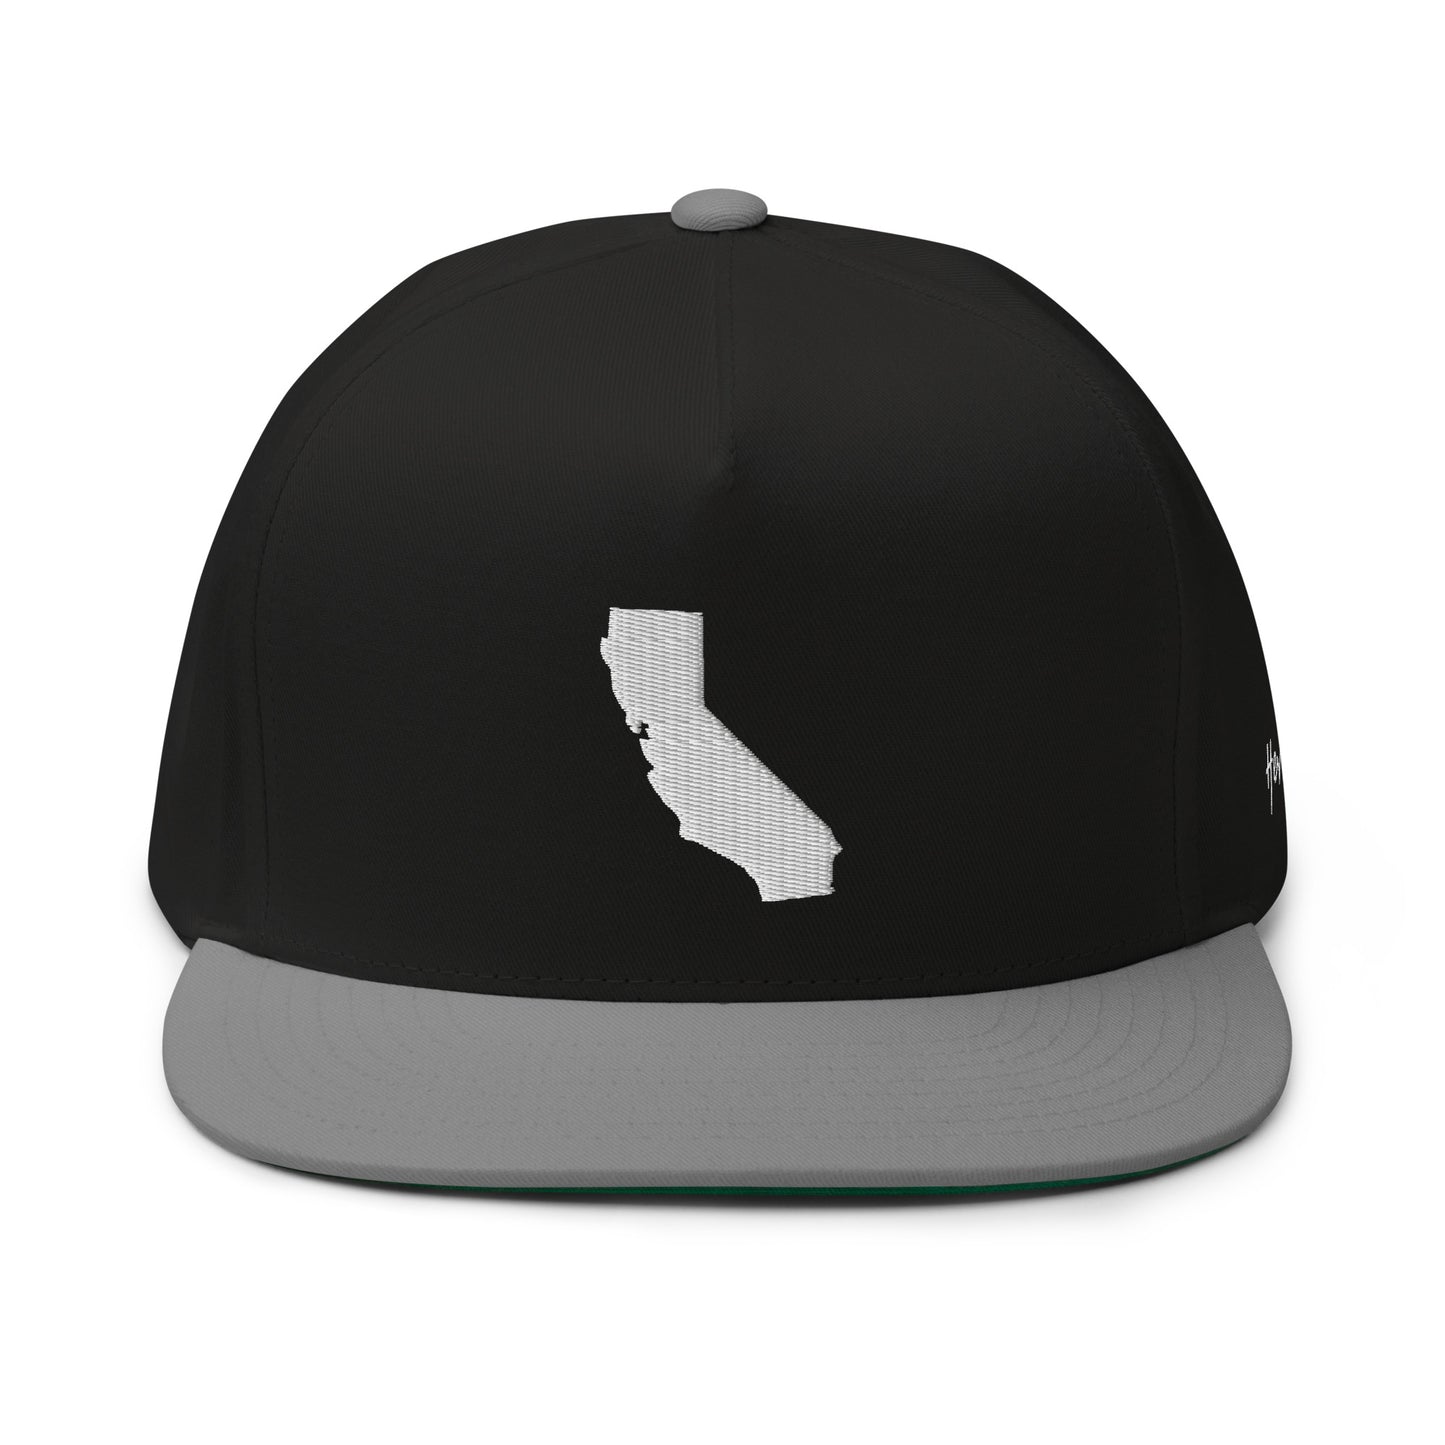 California State Silhouette 5 Panel A-Frame Snapback Hat